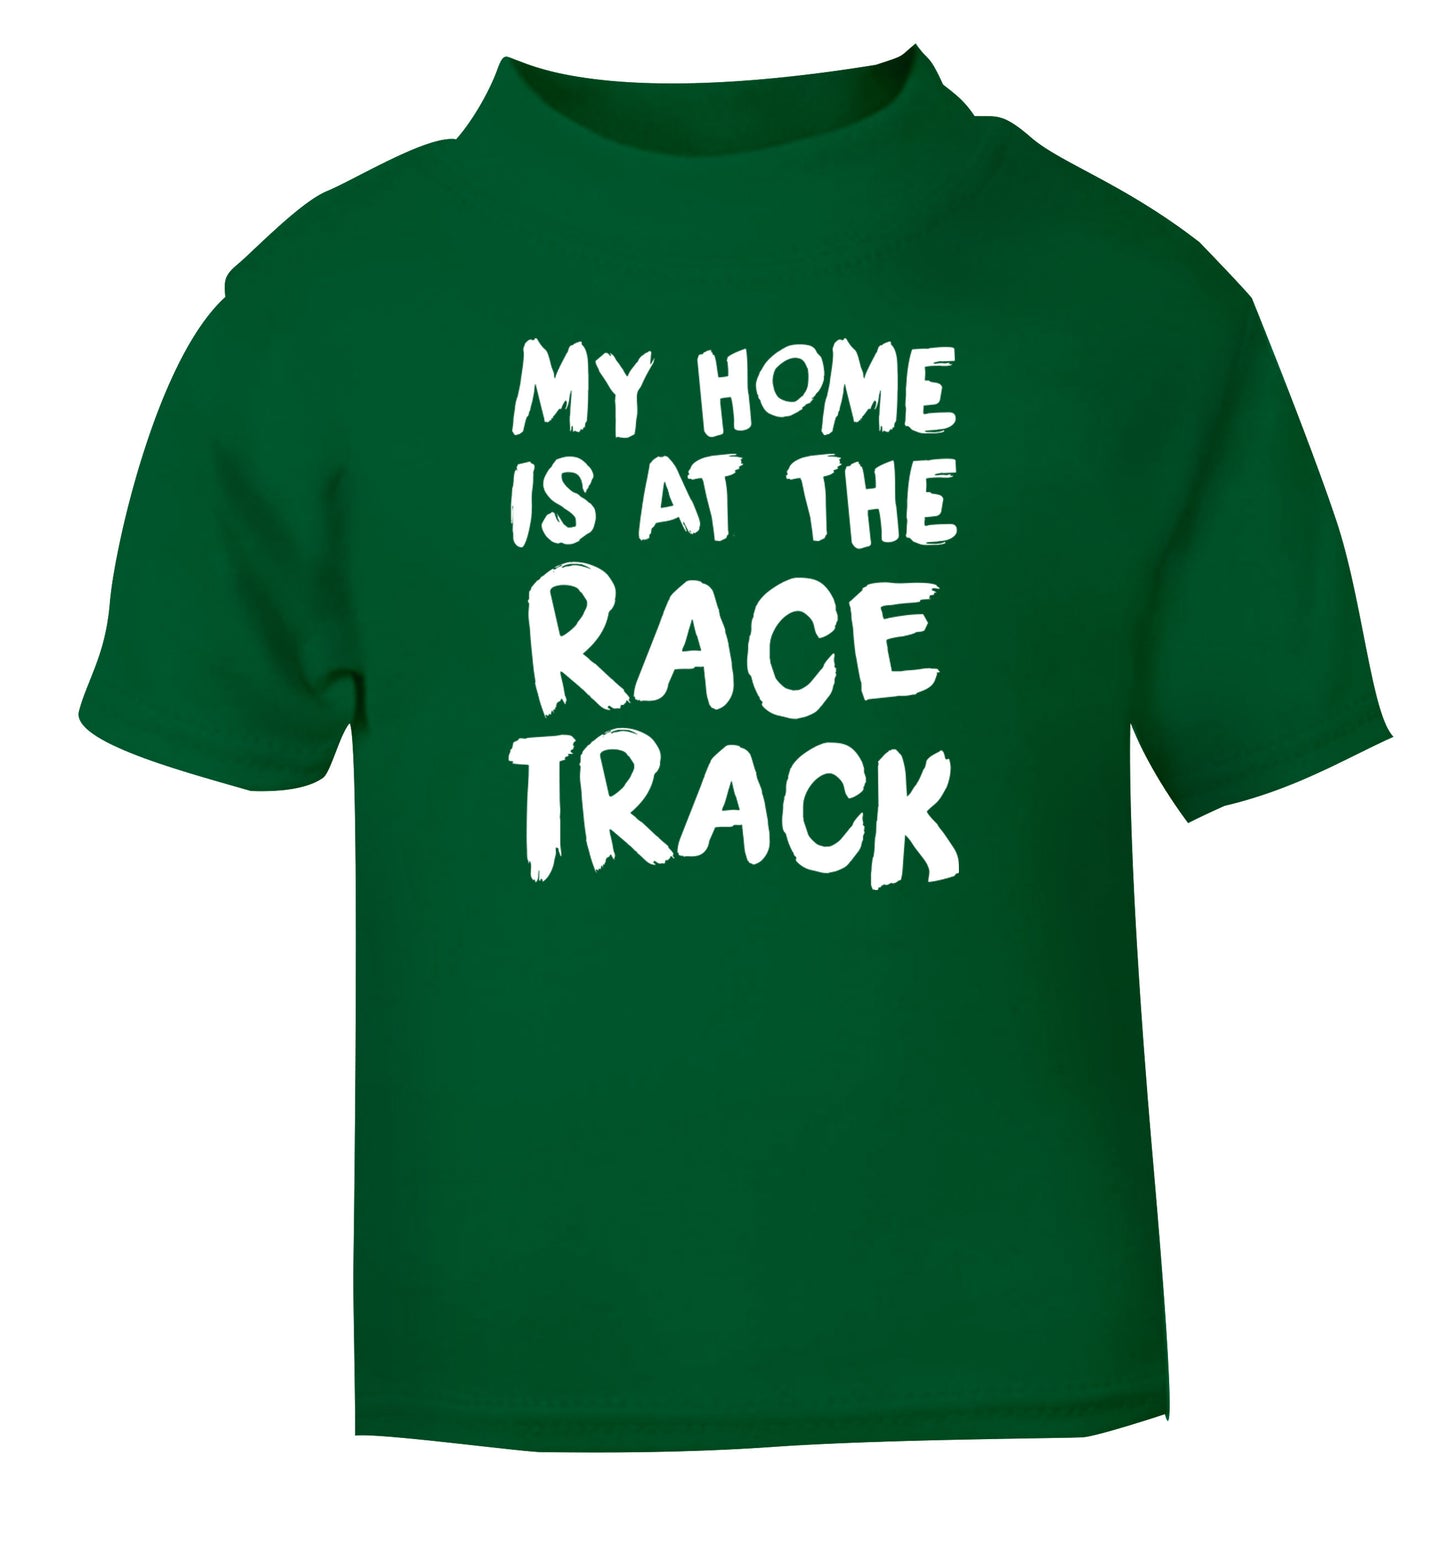 My home is at the race track green Baby Toddler Tshirt 2 Years